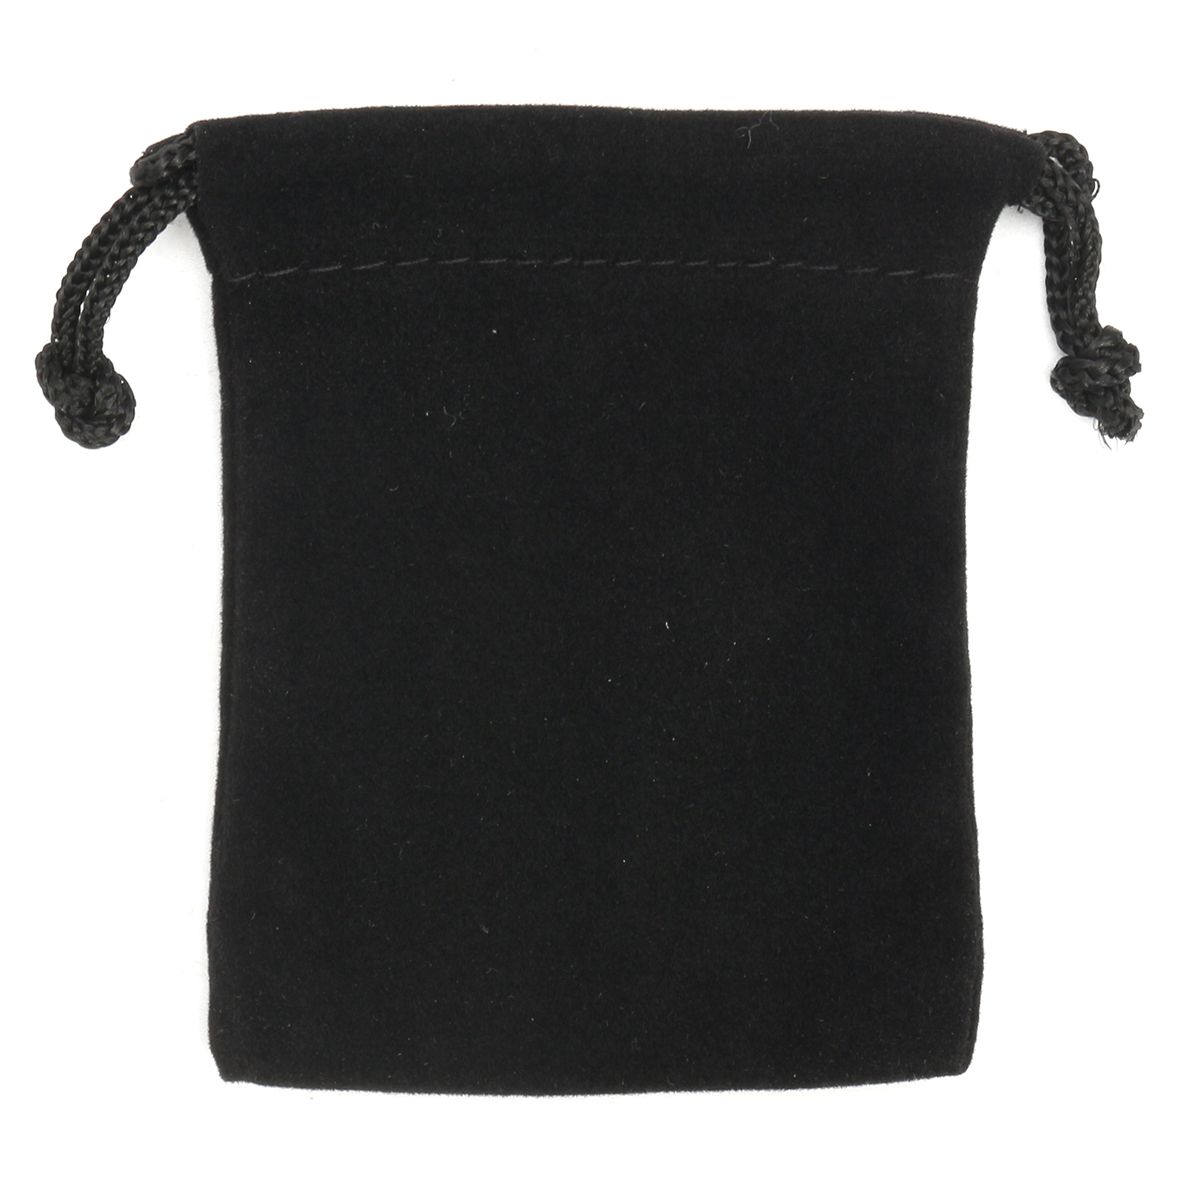 Multi-used-Storage-Bags-Polyhedral-Dices-Black-Velvet-Jewelry-Pouches-for-Electronic-Gadgets-Gaming--1351795